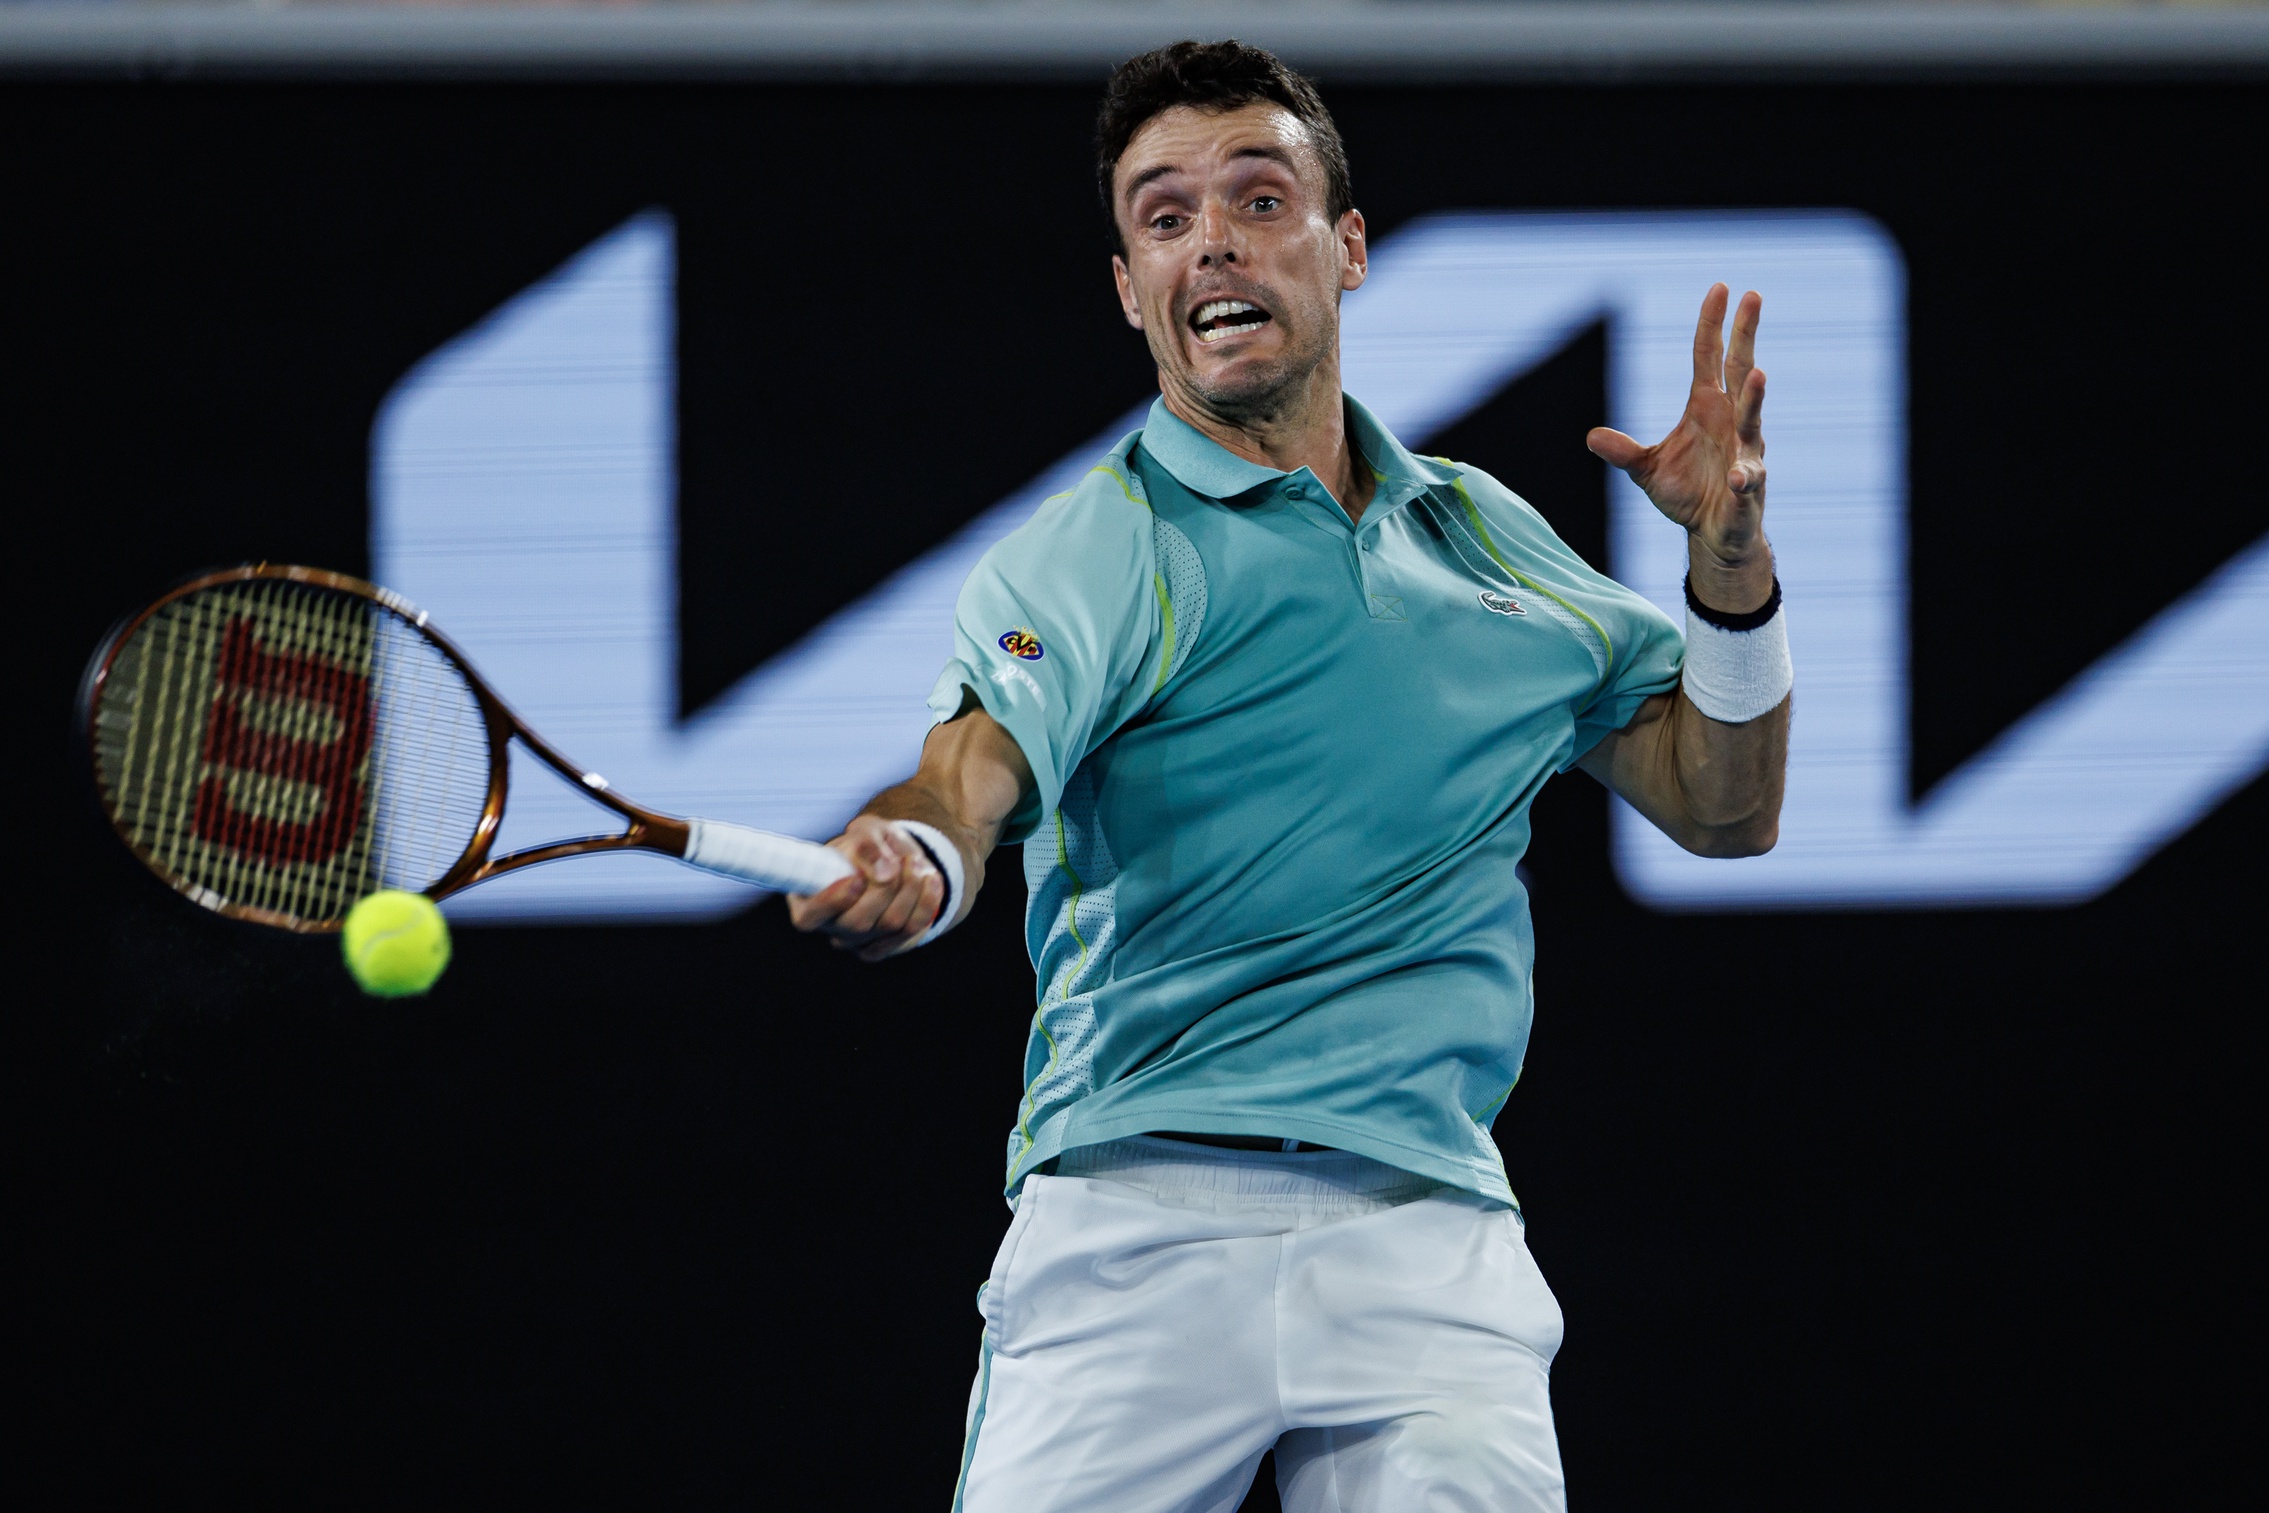 Roberto Bautista Agut in action ahead of the ATP Stockholm Open.